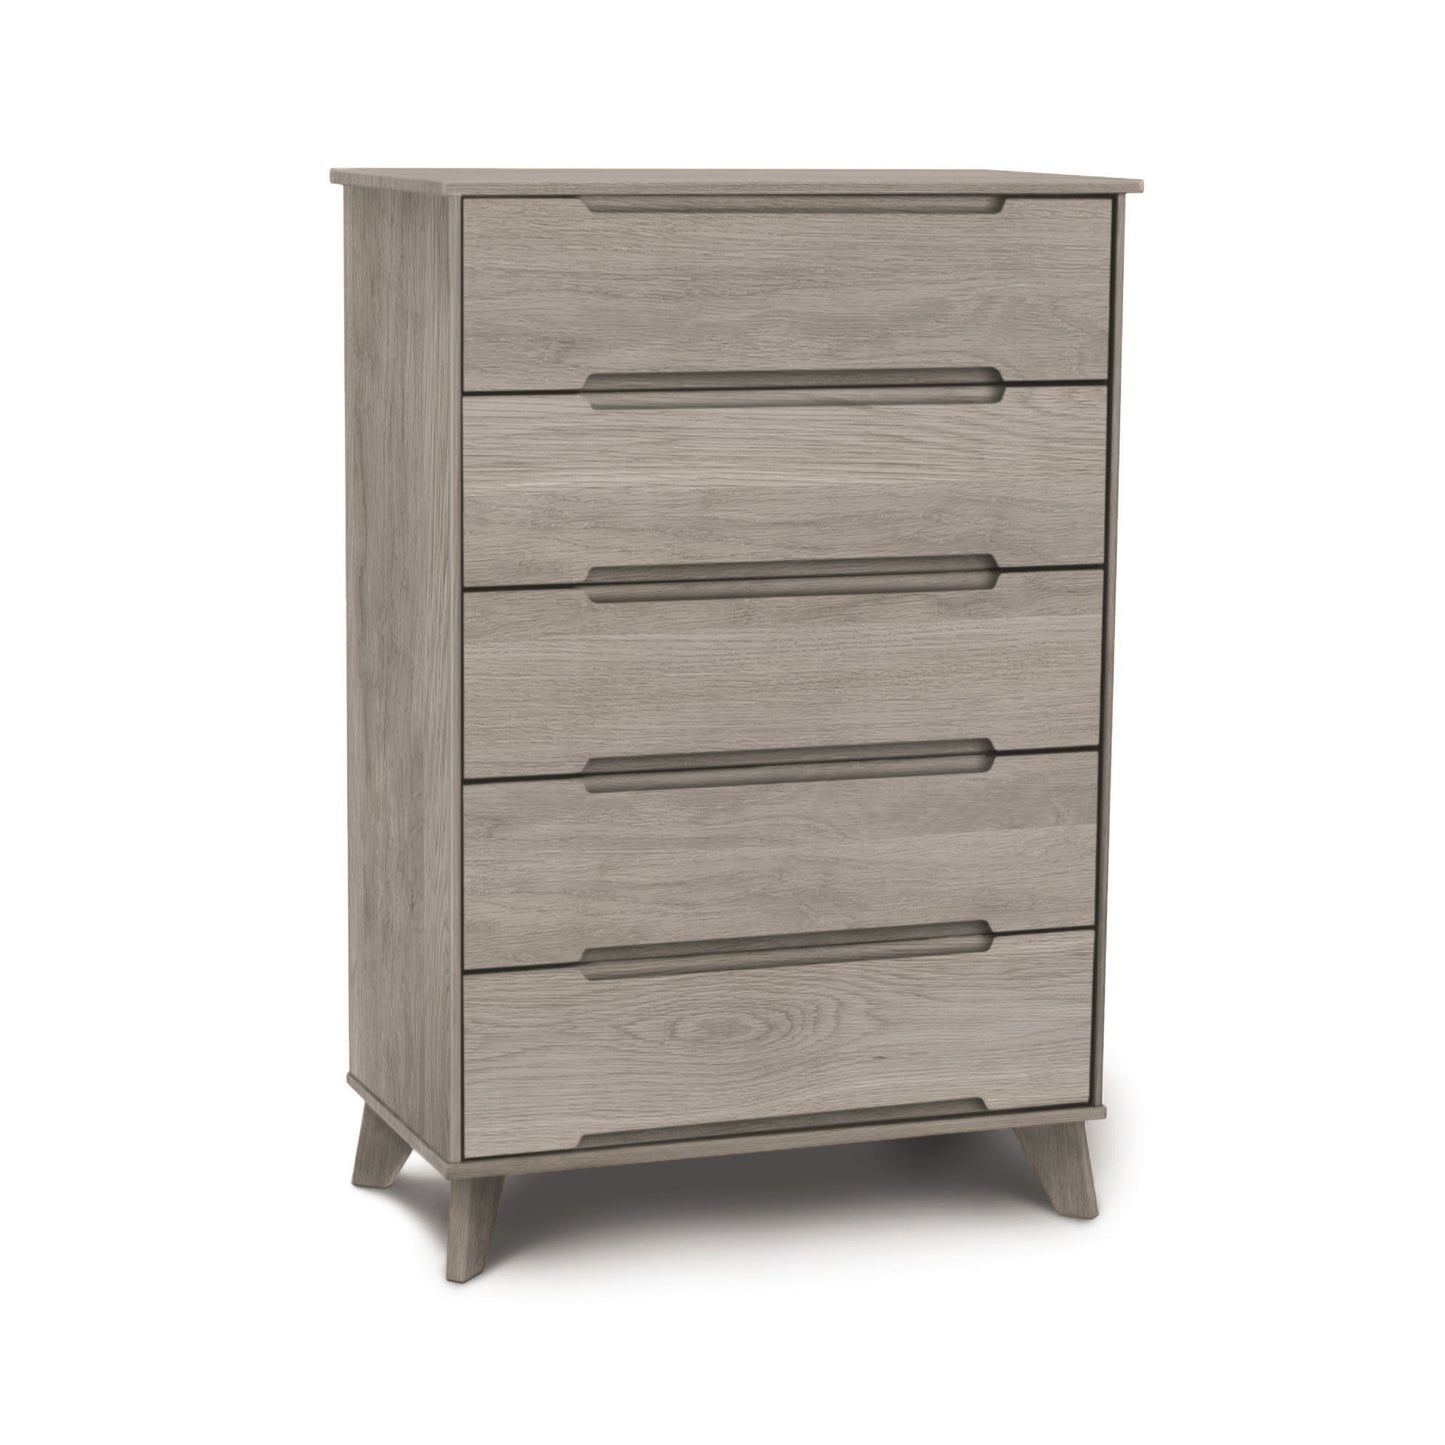 A sustainable Linn 5-Drawer Wide Chest by Copeland Furniture on a white background, crafted from upcycled hardwood.